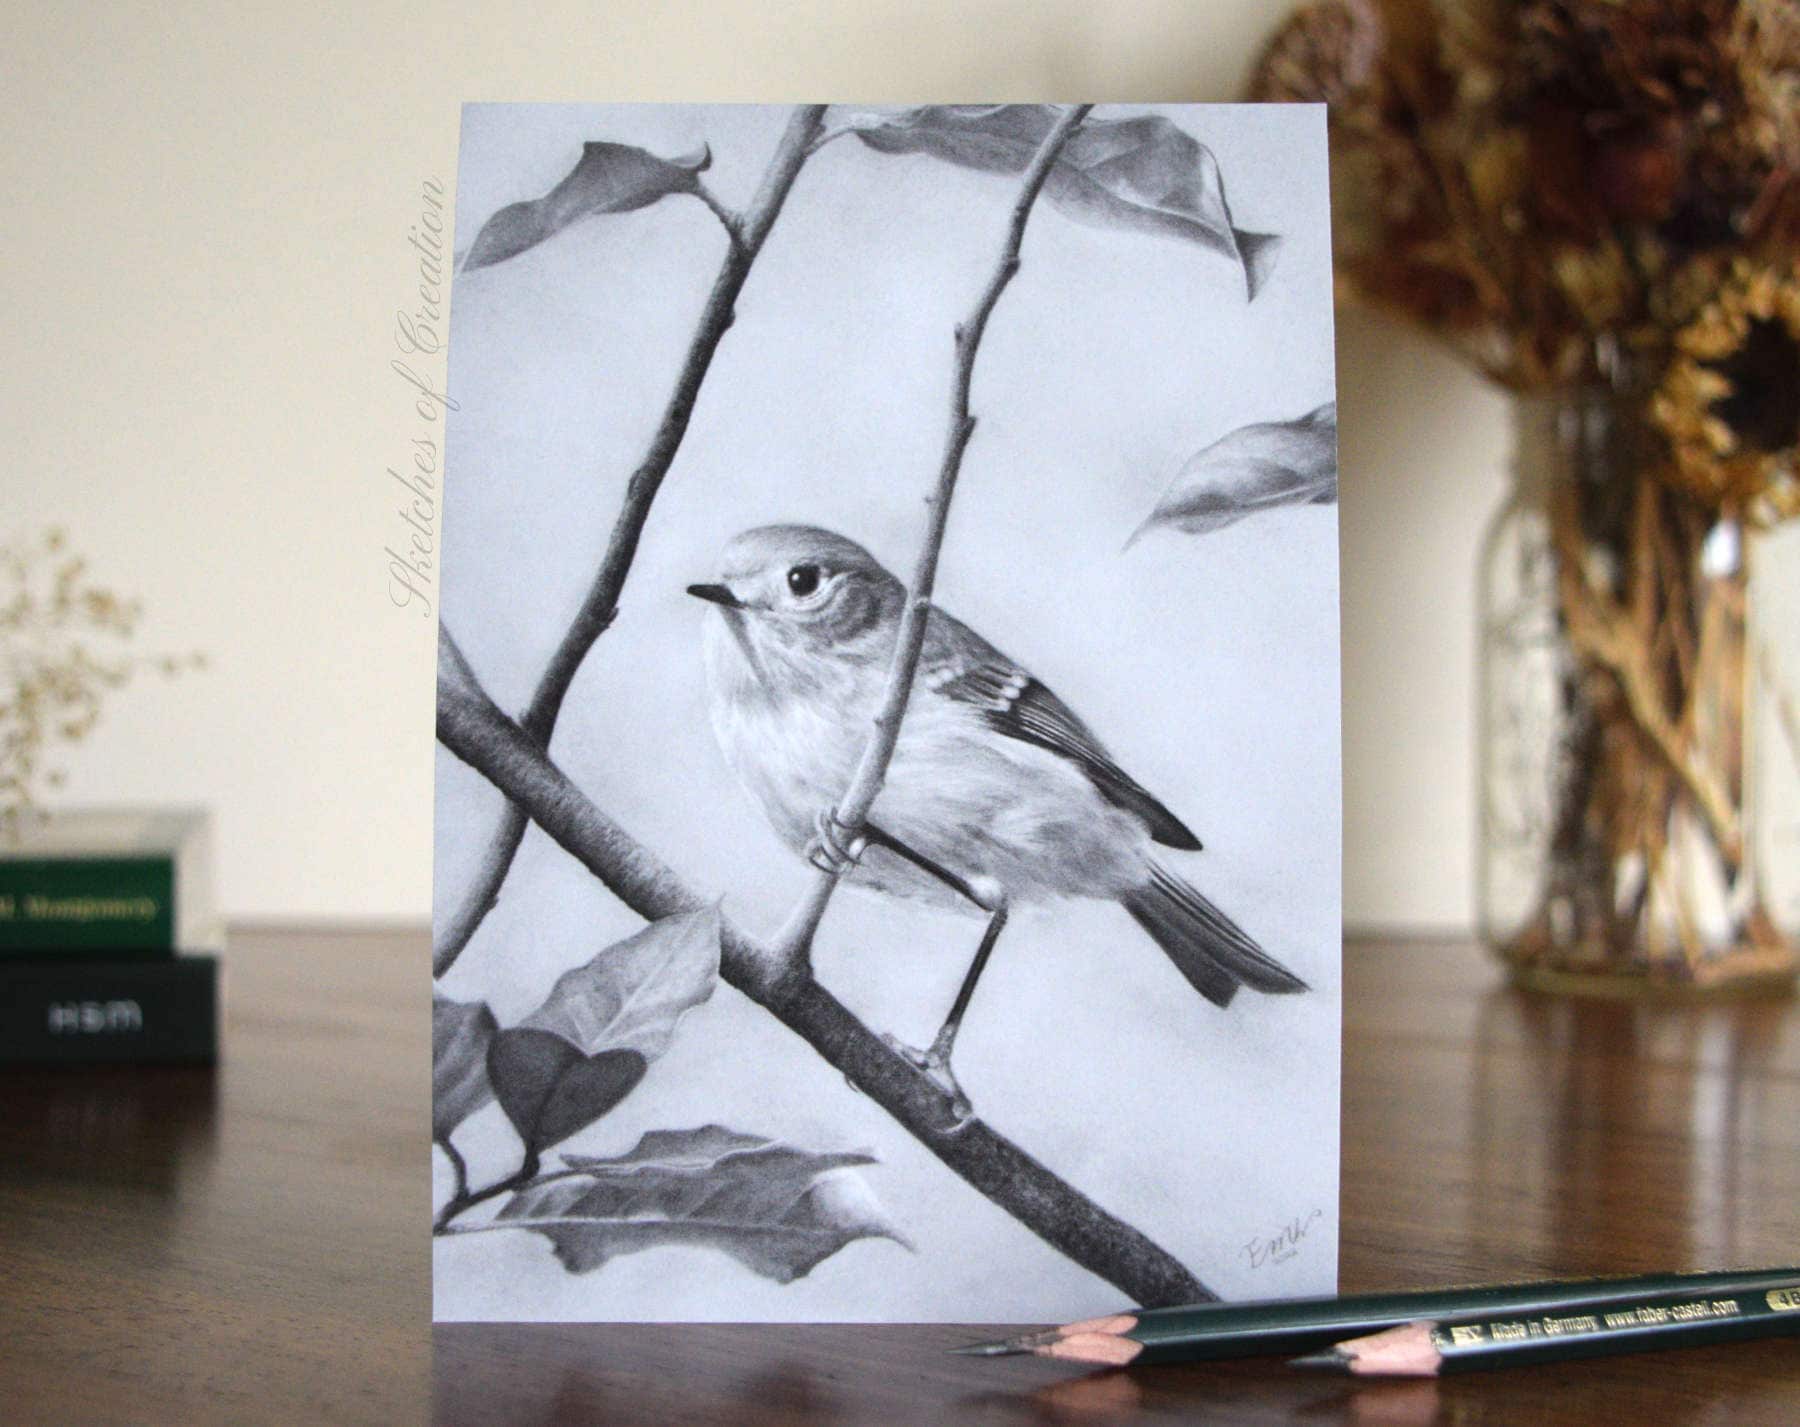 A print of a Ruby-crowned Kinglet